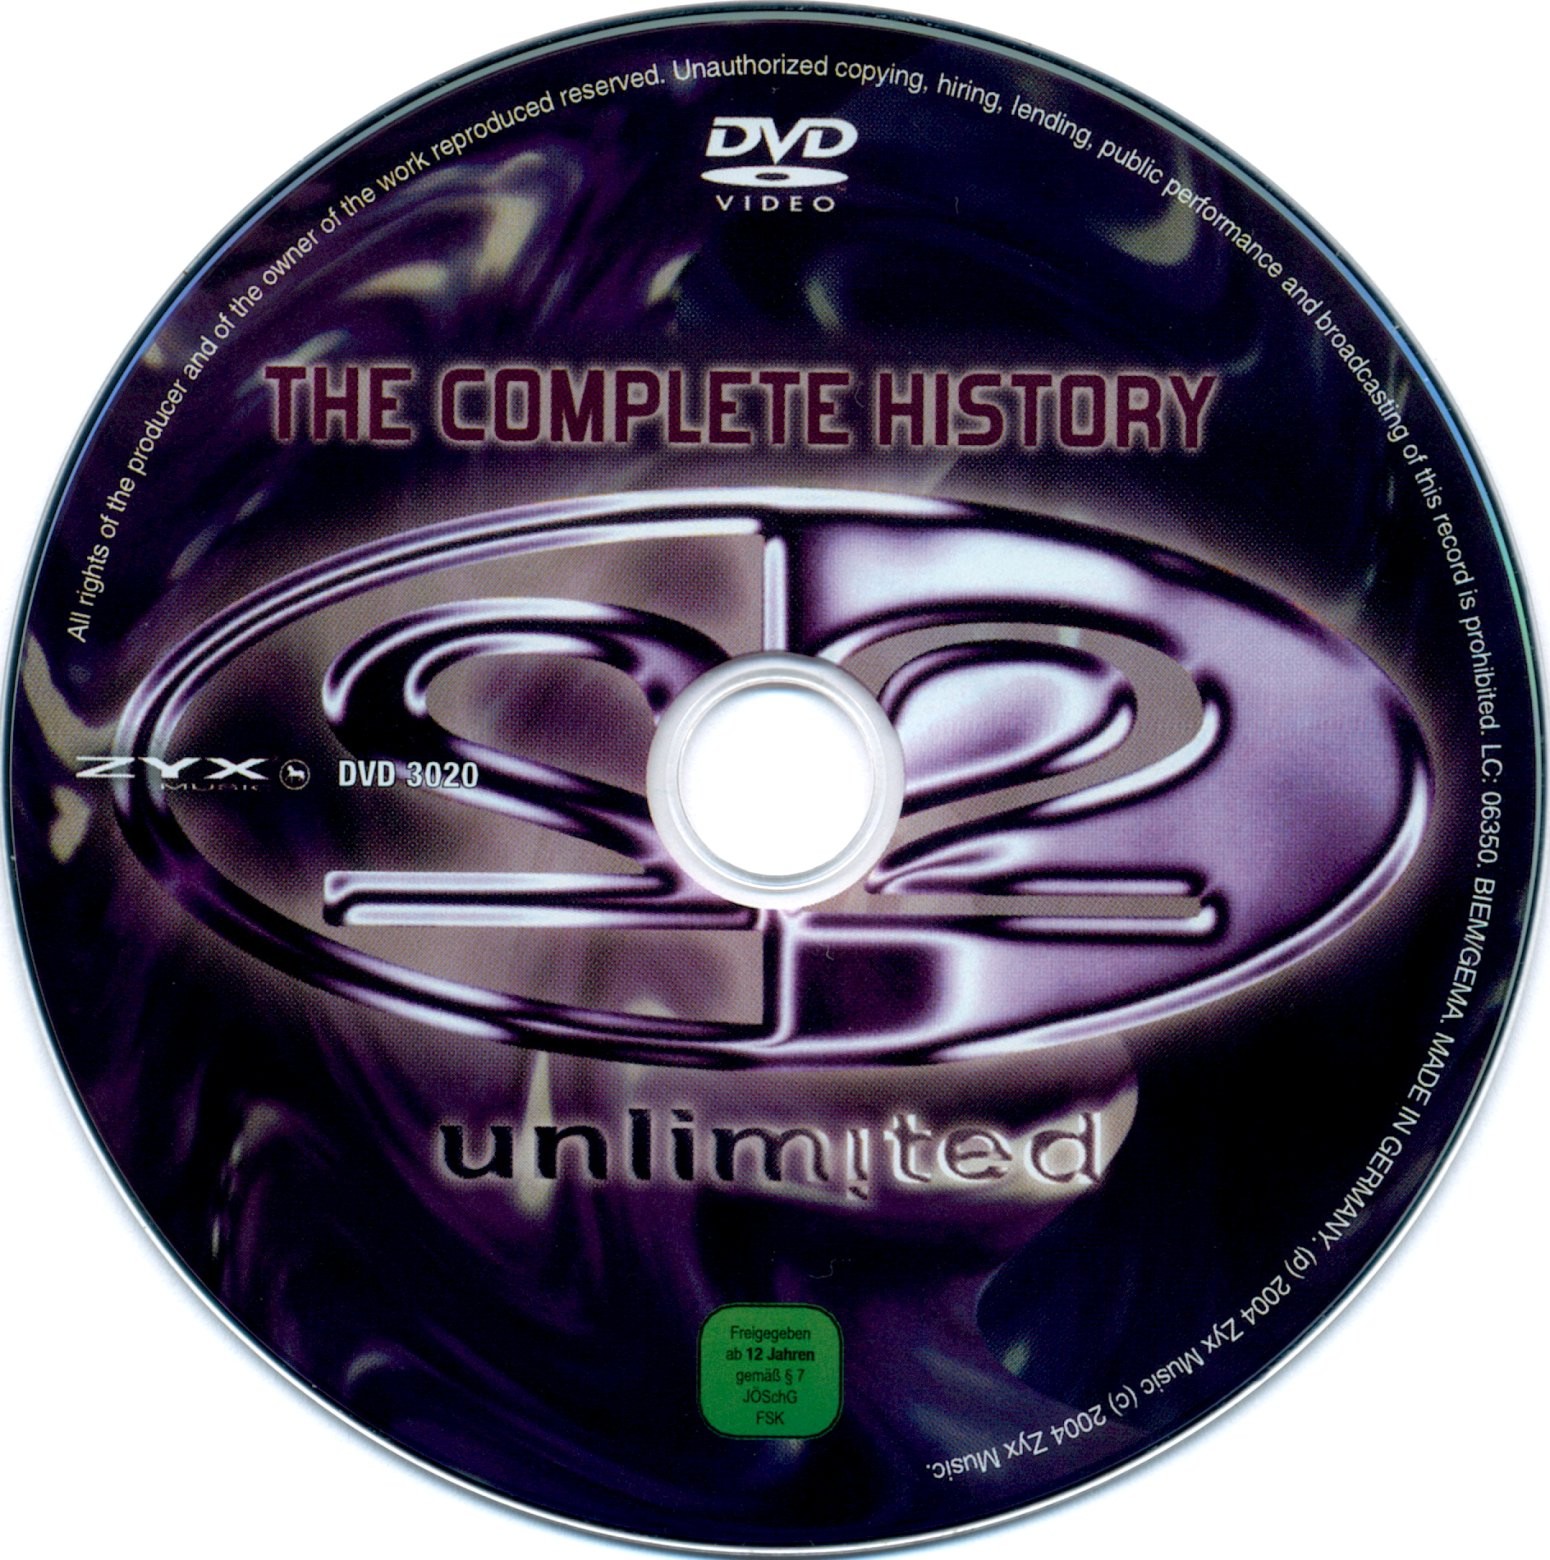 2 unlimited - The complete history DISC 1